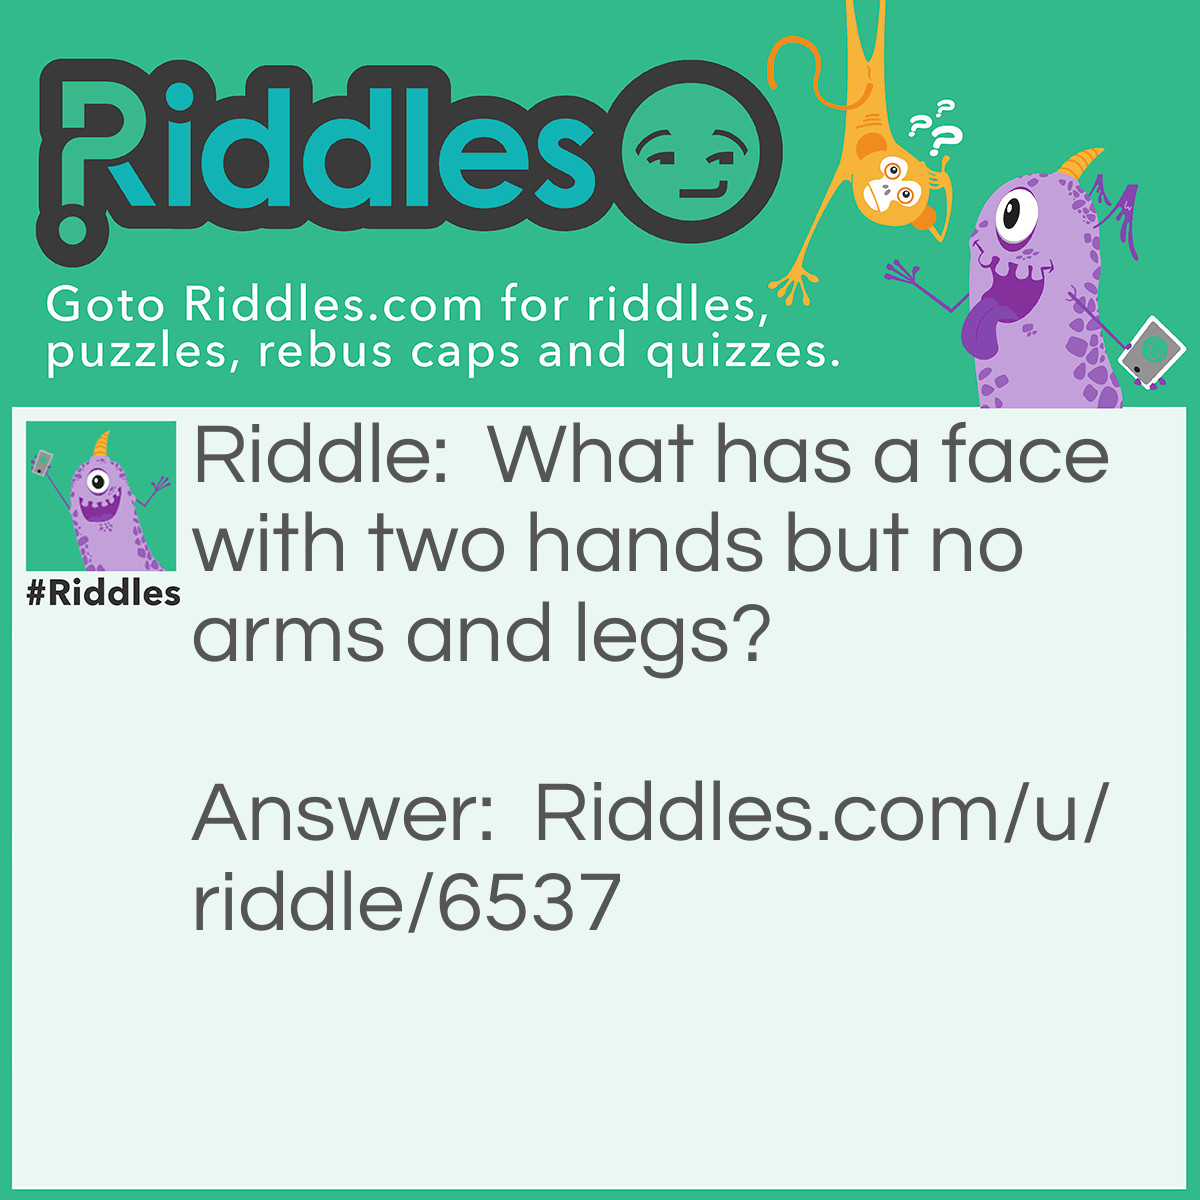 Riddle: What has a face with two hands but no arms and legs? Answer: A clock.